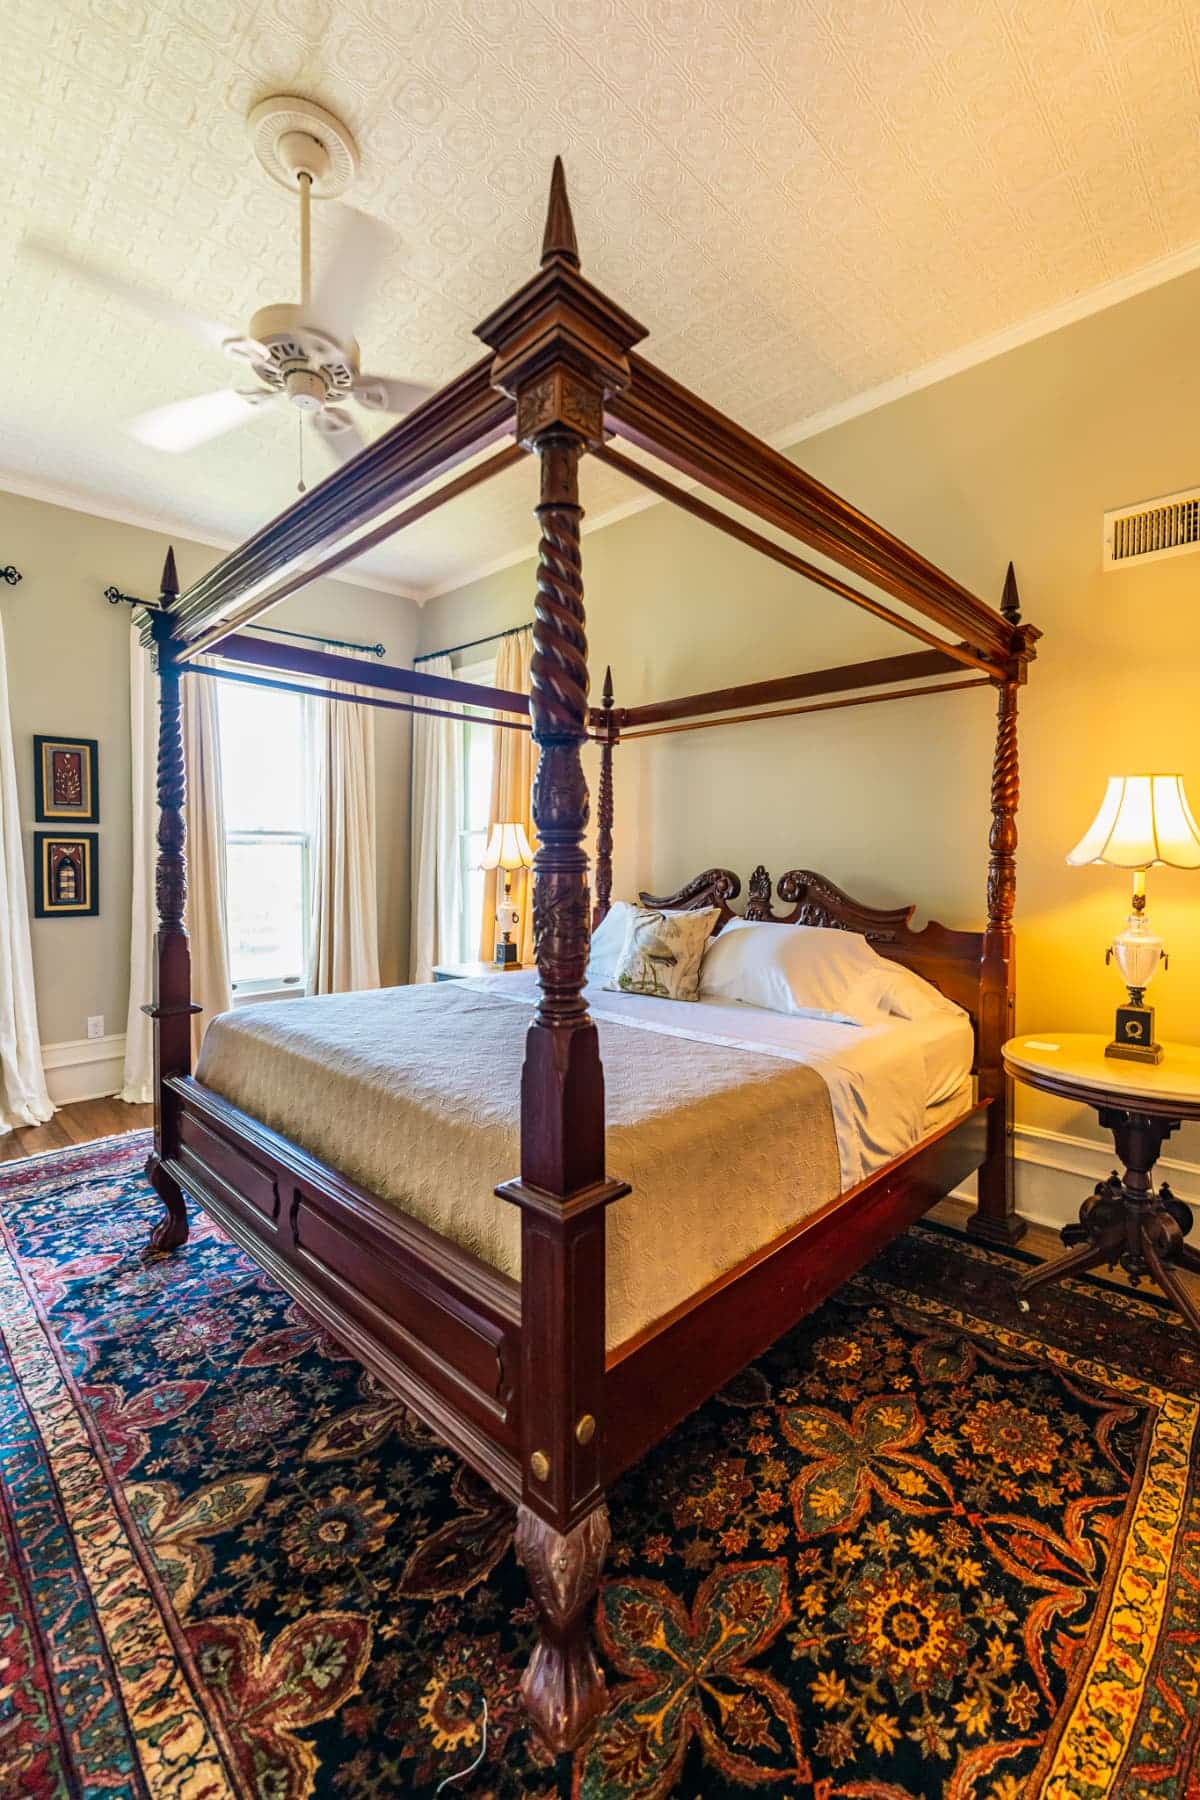 A wood canopy bed, a bedside table, and luxurious rug with the curtains open in the background